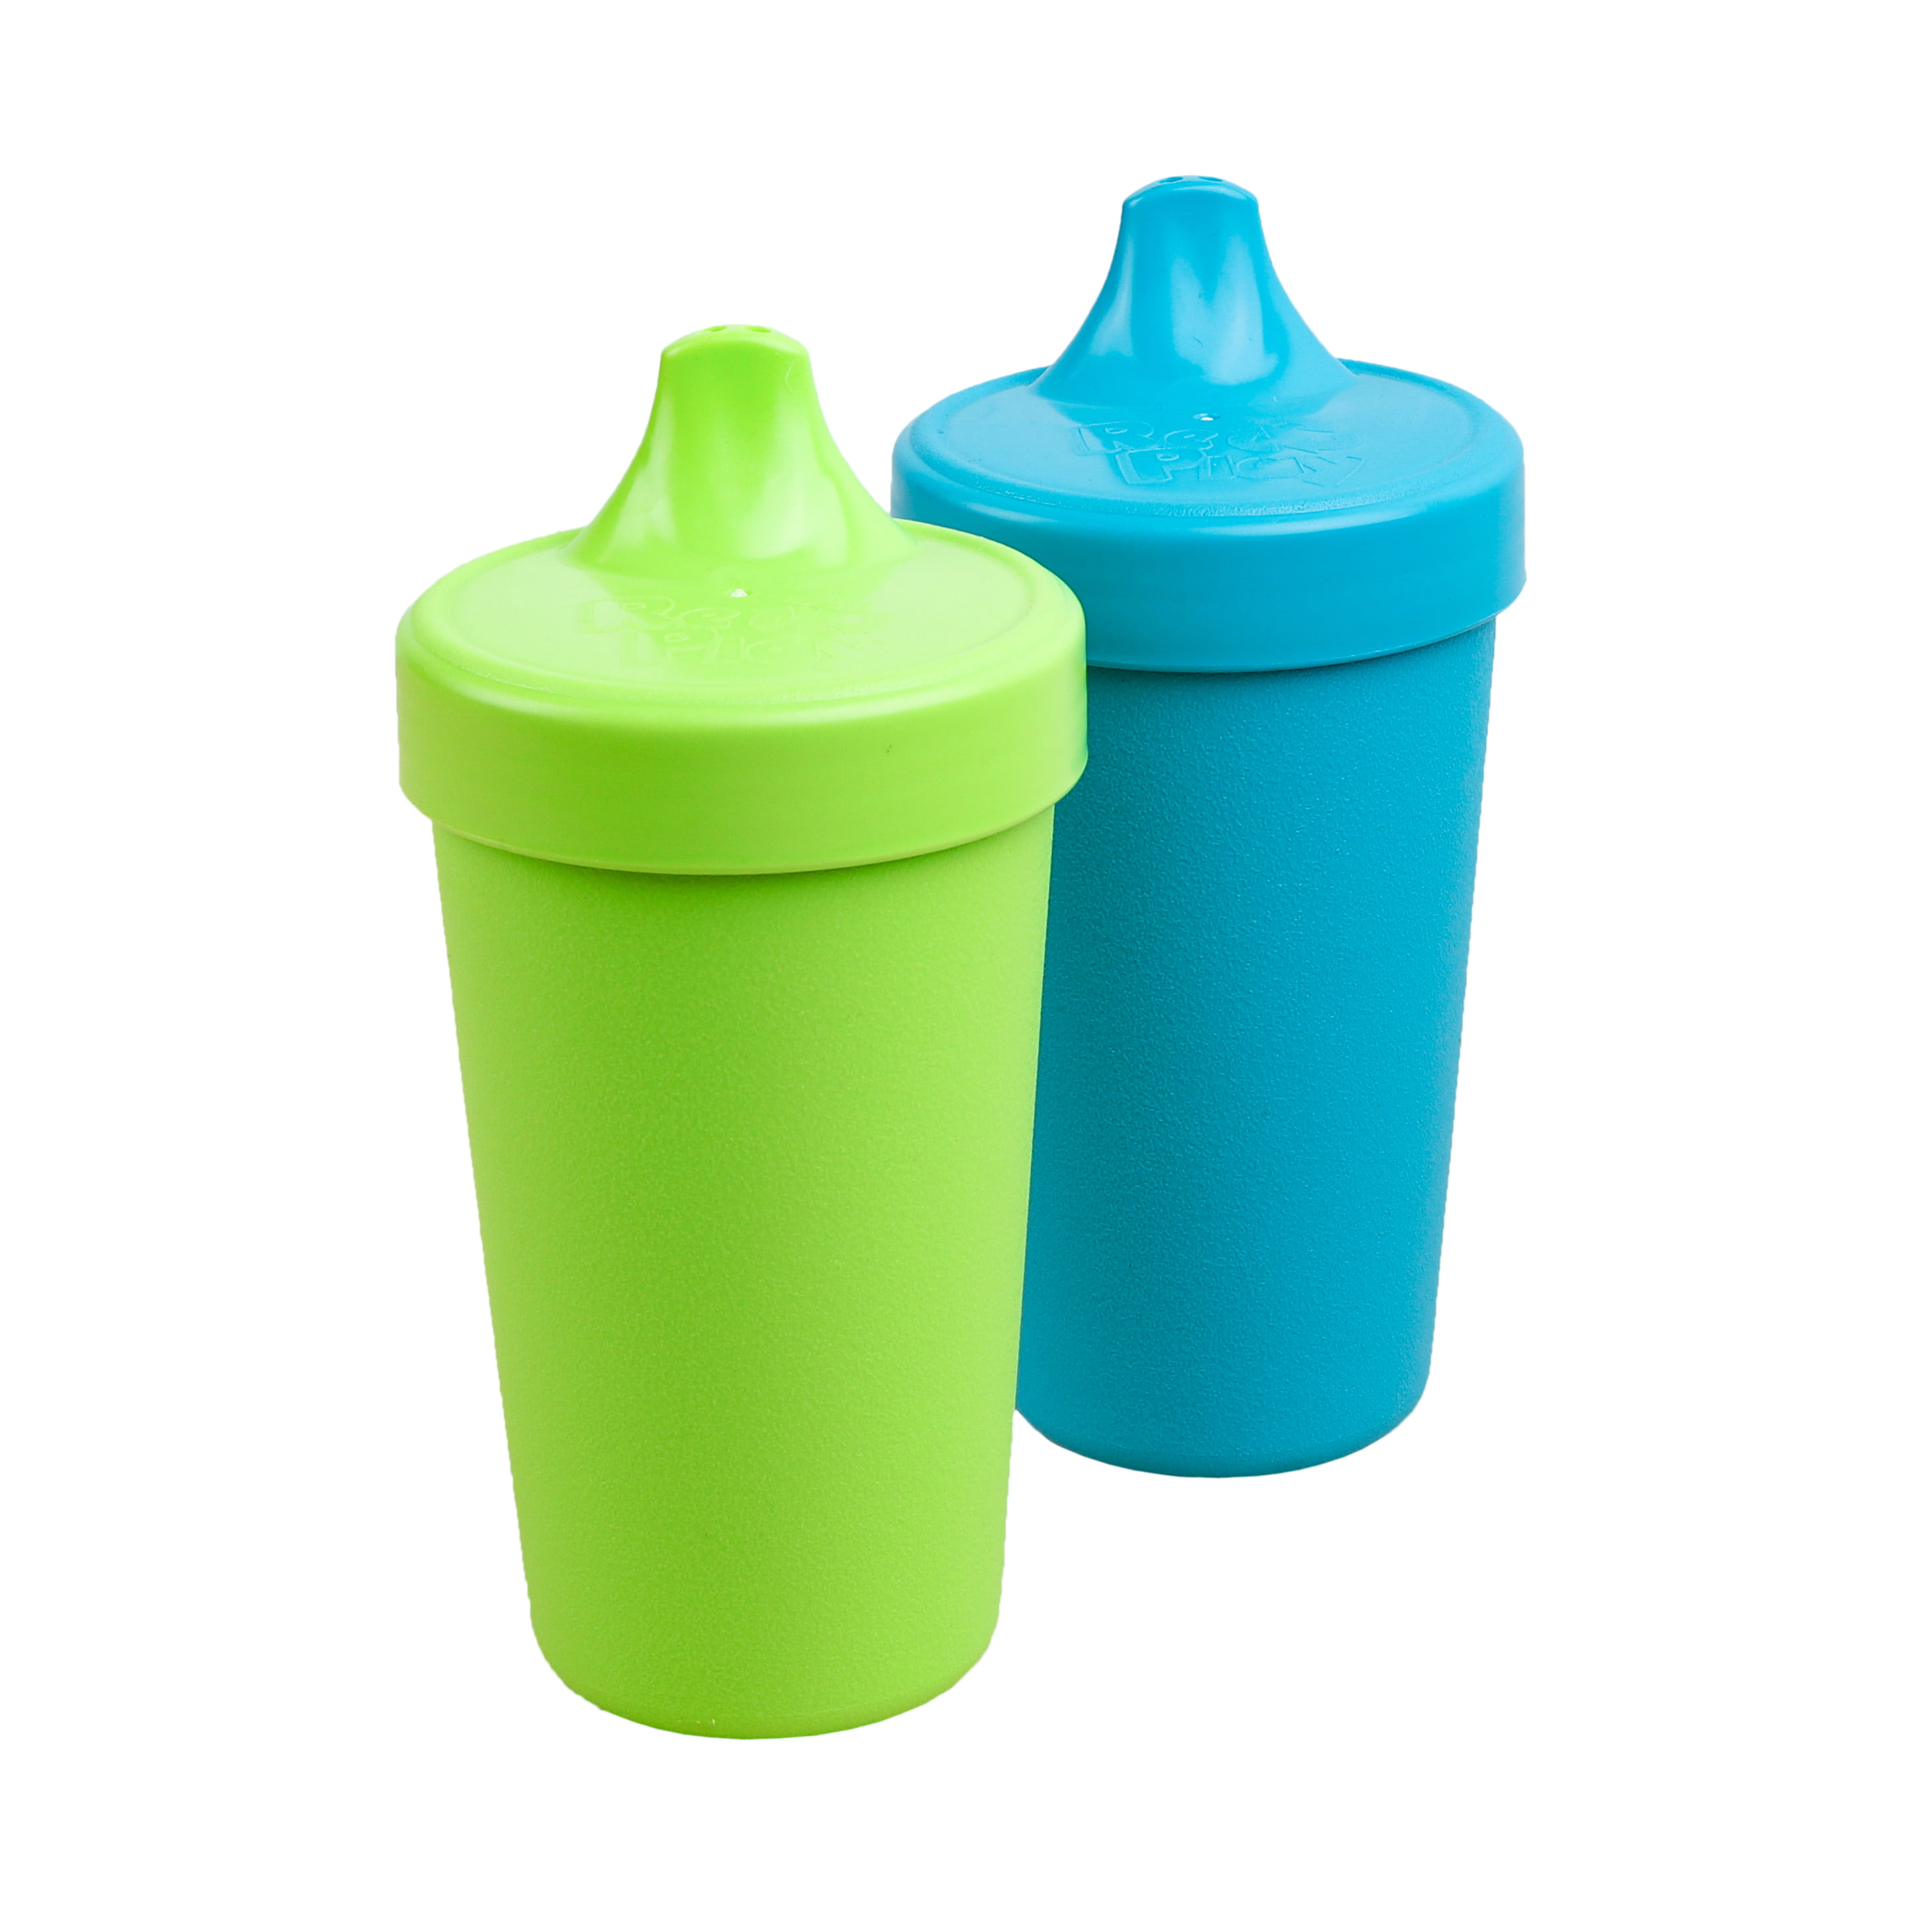 Re-Play Made in The USA 3pk No Spill Sippy Cups for Baby, Toddler, and Child Feeding - Bright Pink, Purple, Aqua (Sparkle)